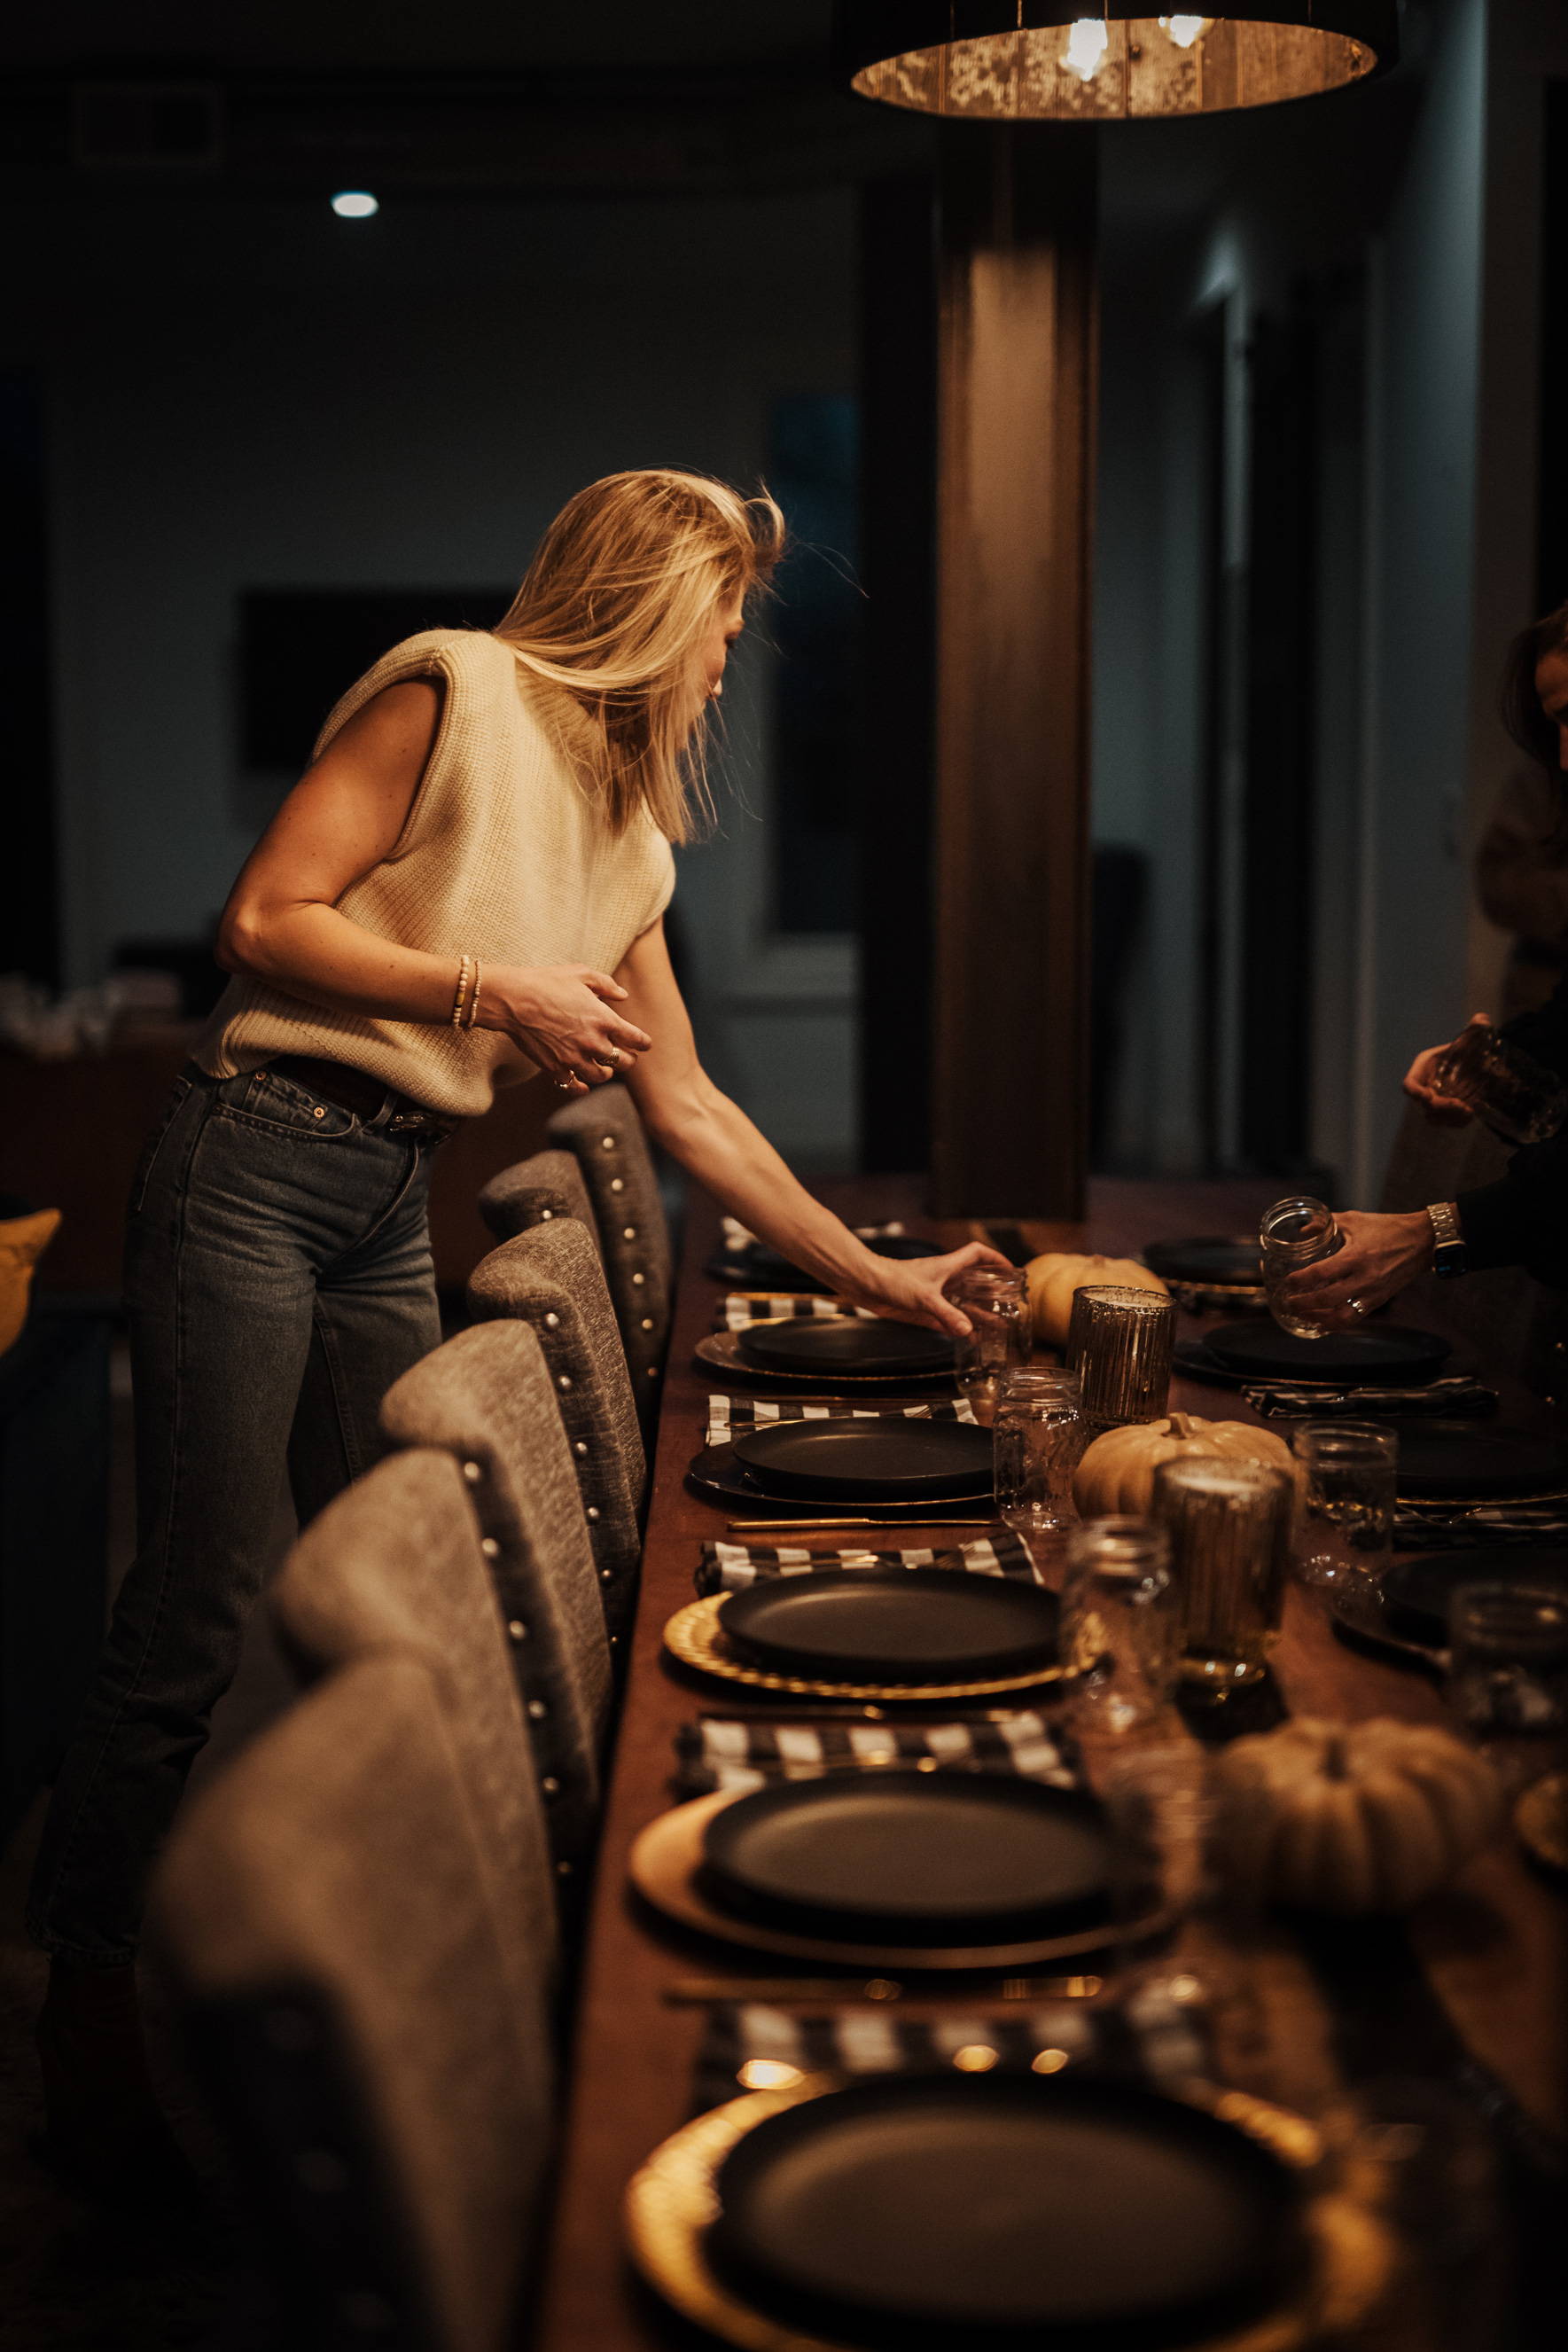 A woman setting a dinner table.